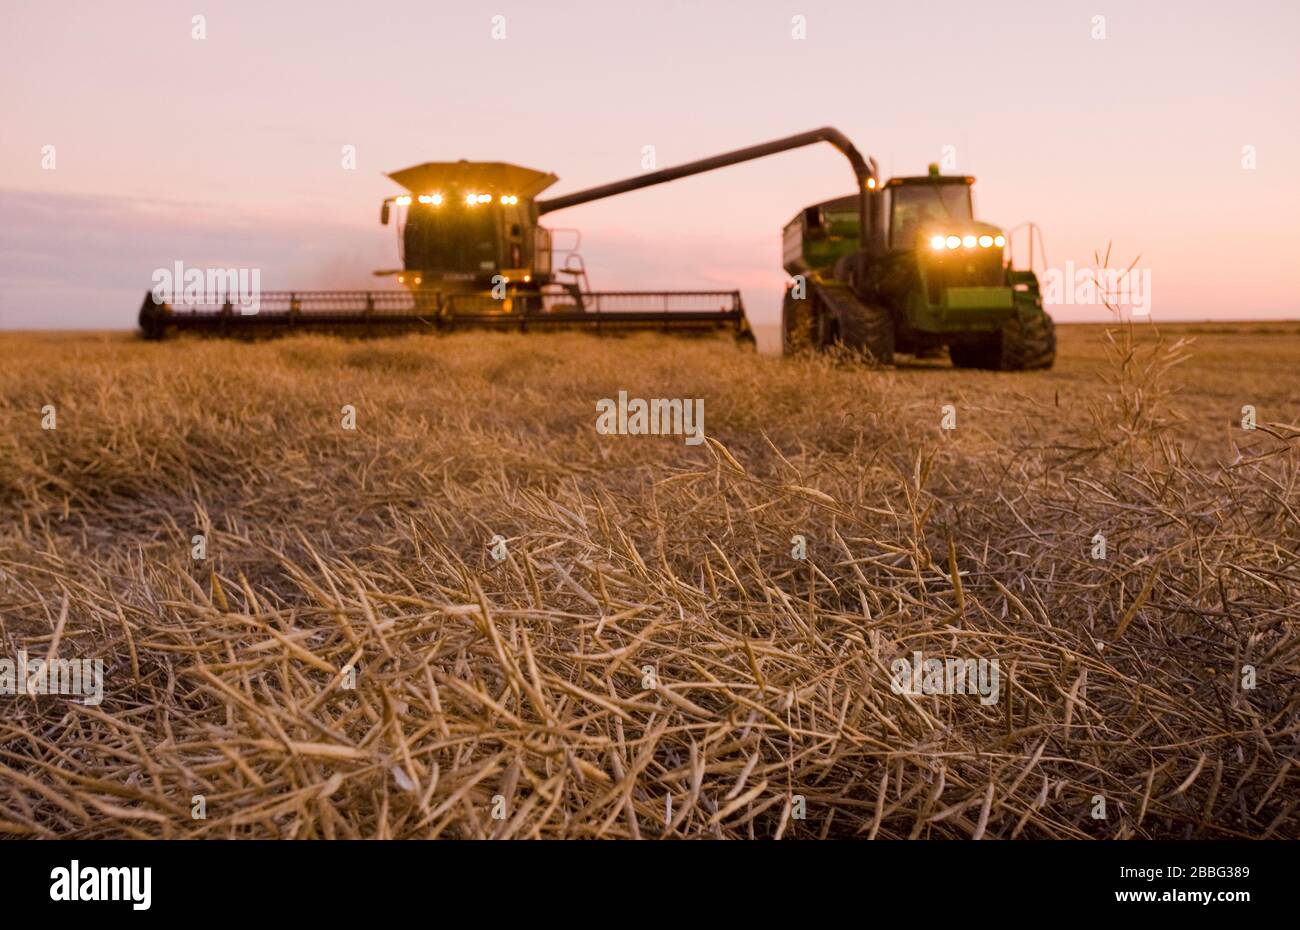 a combine harvester straight cuts a mature standing field of canola while unloading into a grain wagon on the go during the harvest, near Brunkild, Manitoba, Canada Stock Photo